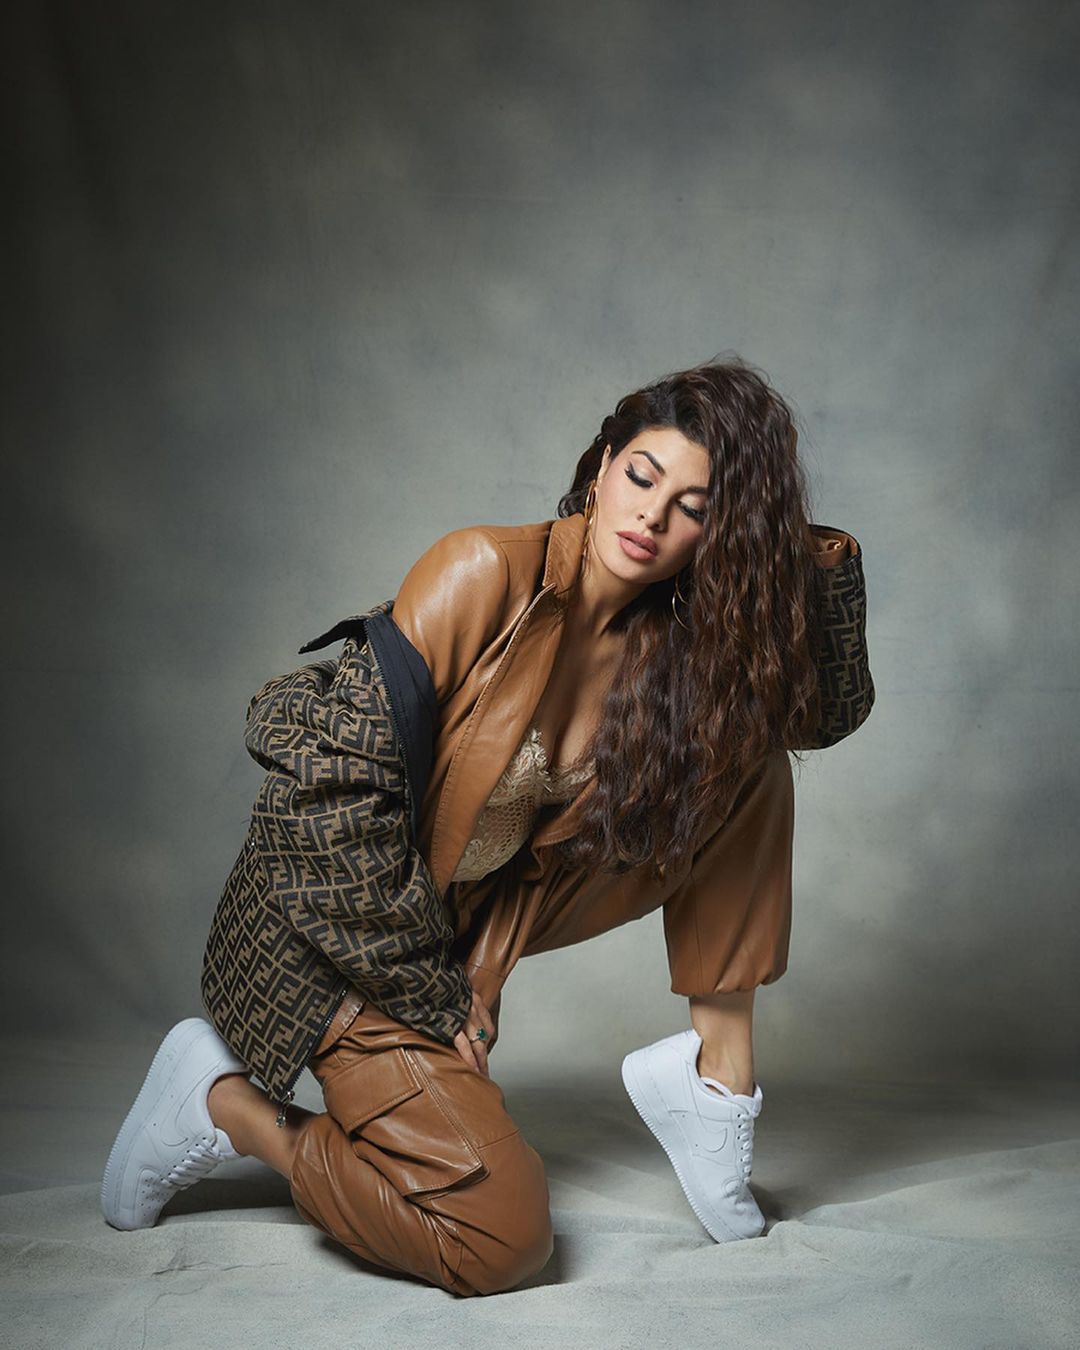 Jacqueline Fernandez Set For Her Hollywood Debut With An Anthology Titled 'Women Stories'